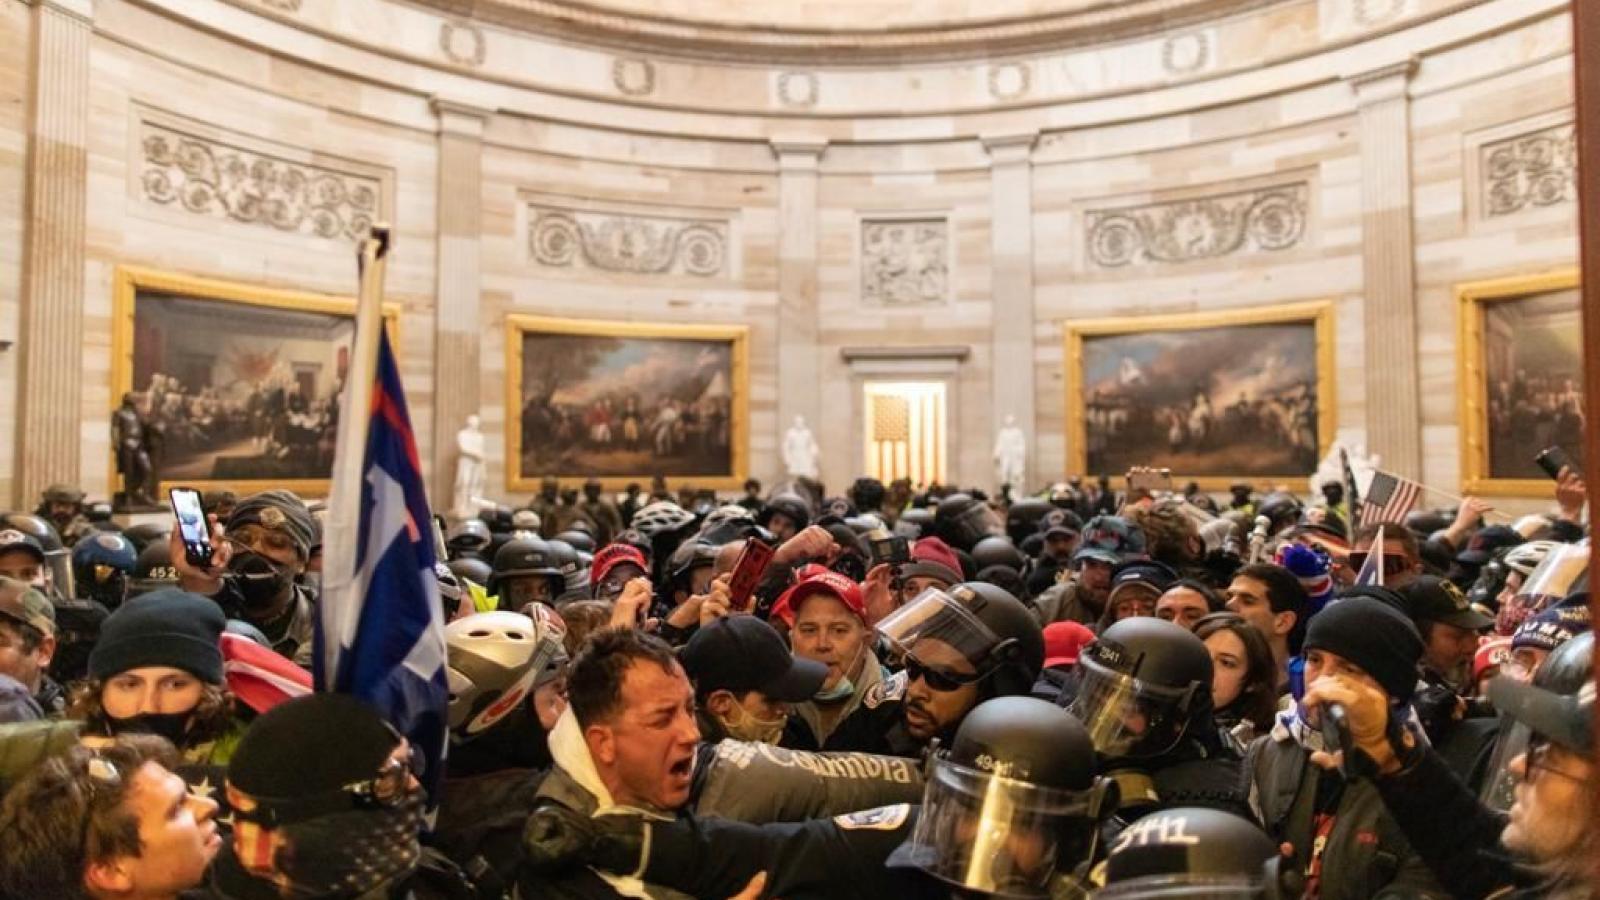 Protesters clash with police in the Capitol, Jan. 6